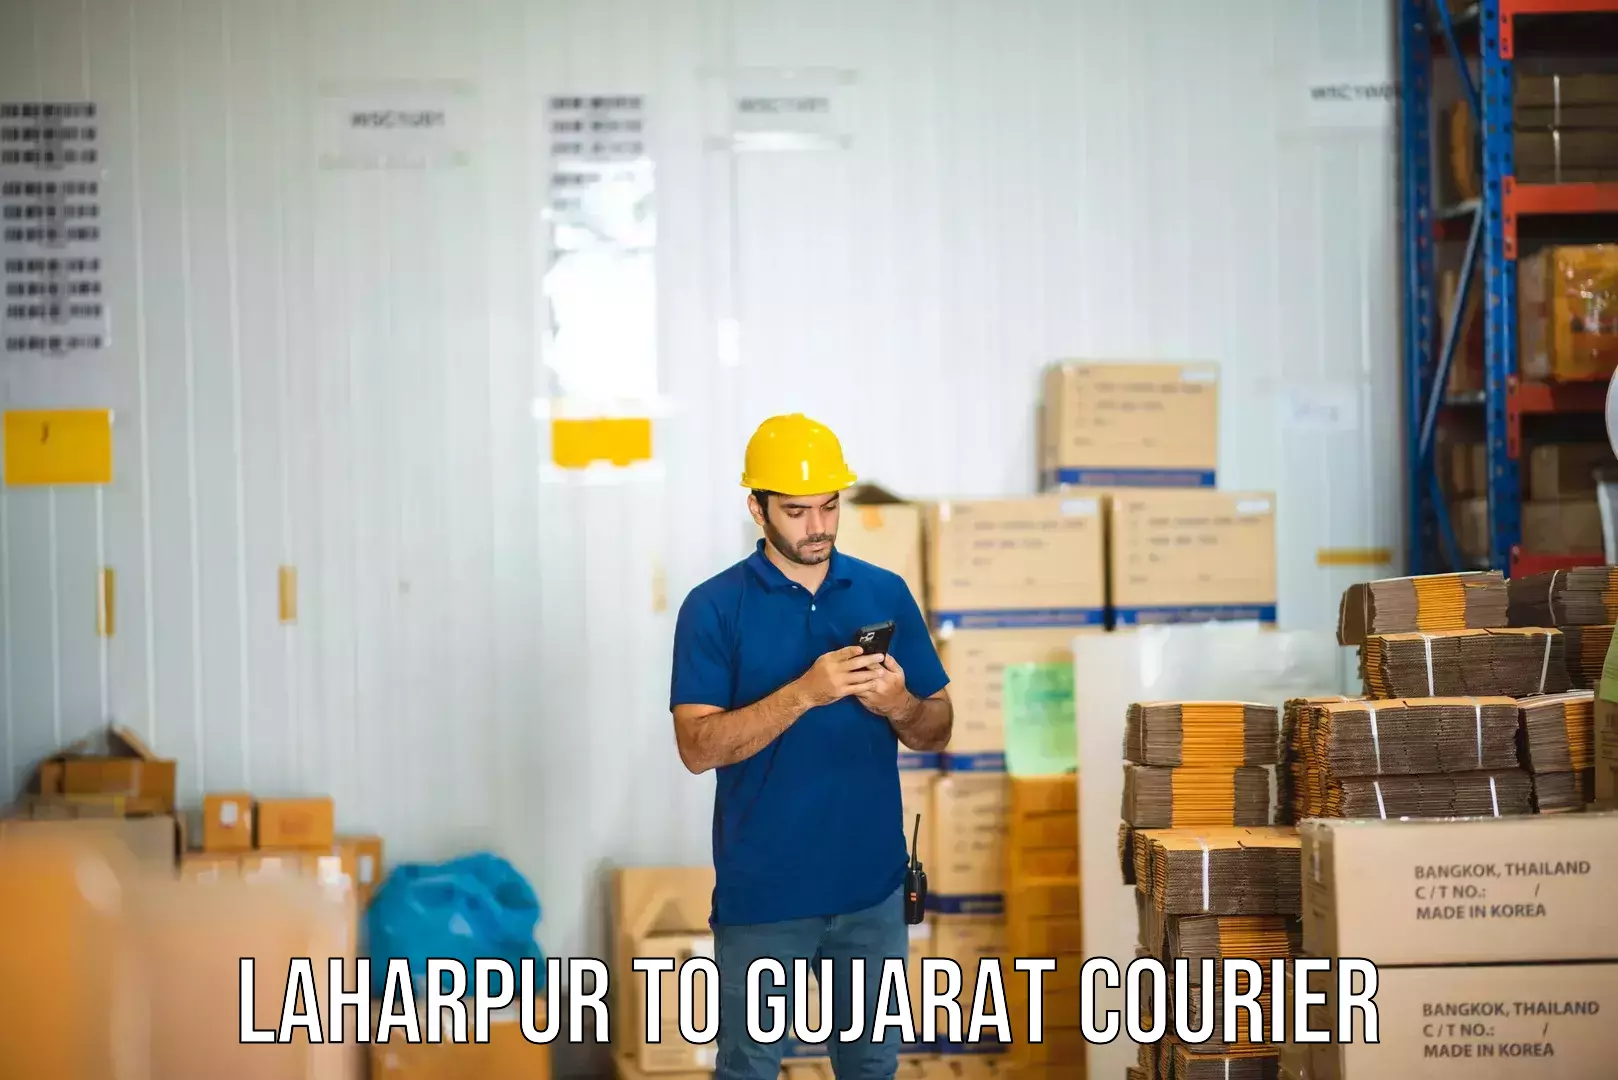 Advanced delivery network Laharpur to Gujarat